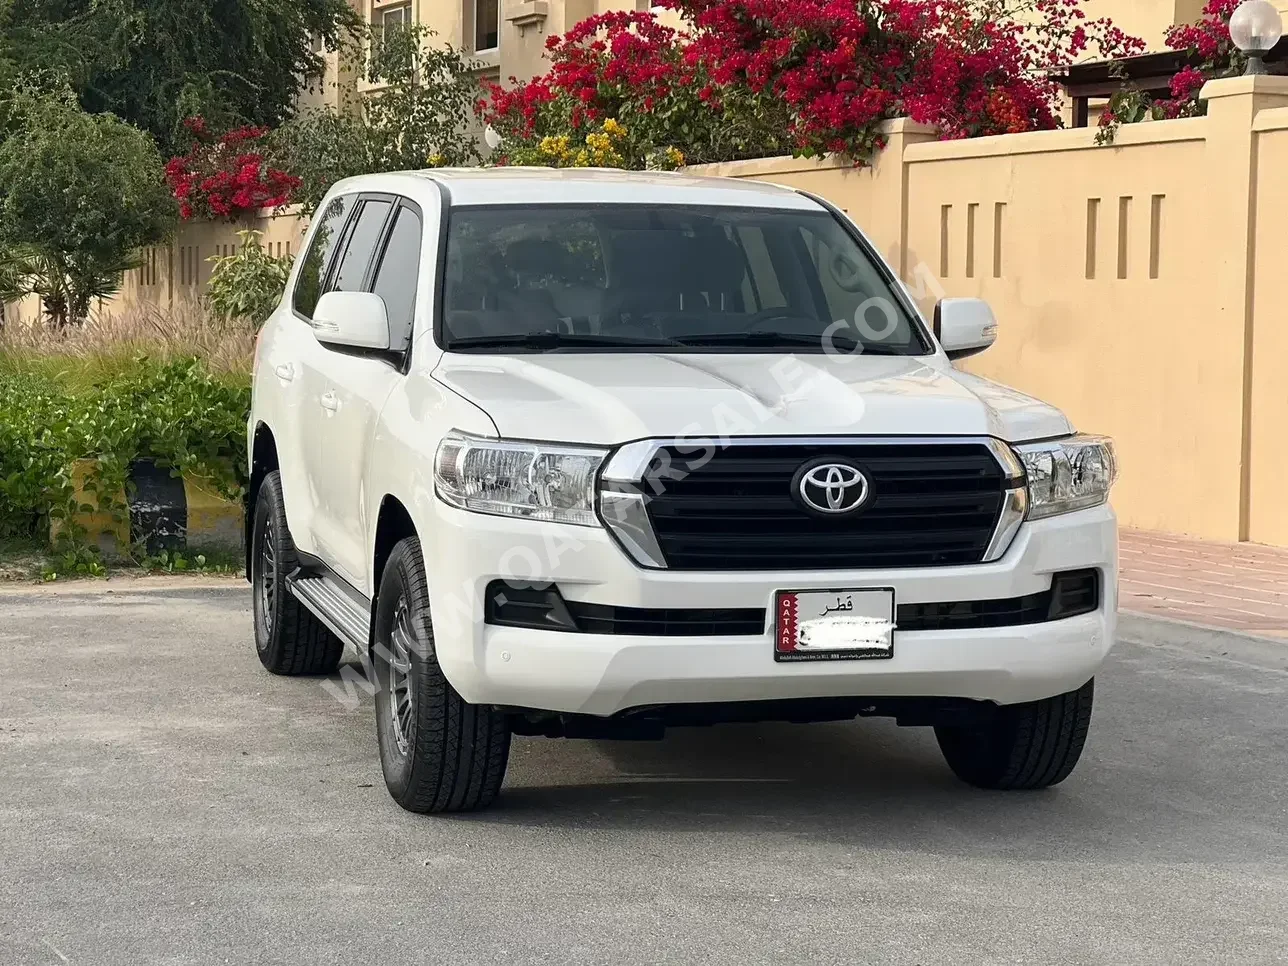 Toyota  Land Cruiser  G  2020  Automatic  160,000 Km  6 Cylinder  Four Wheel Drive (4WD)  SUV  White